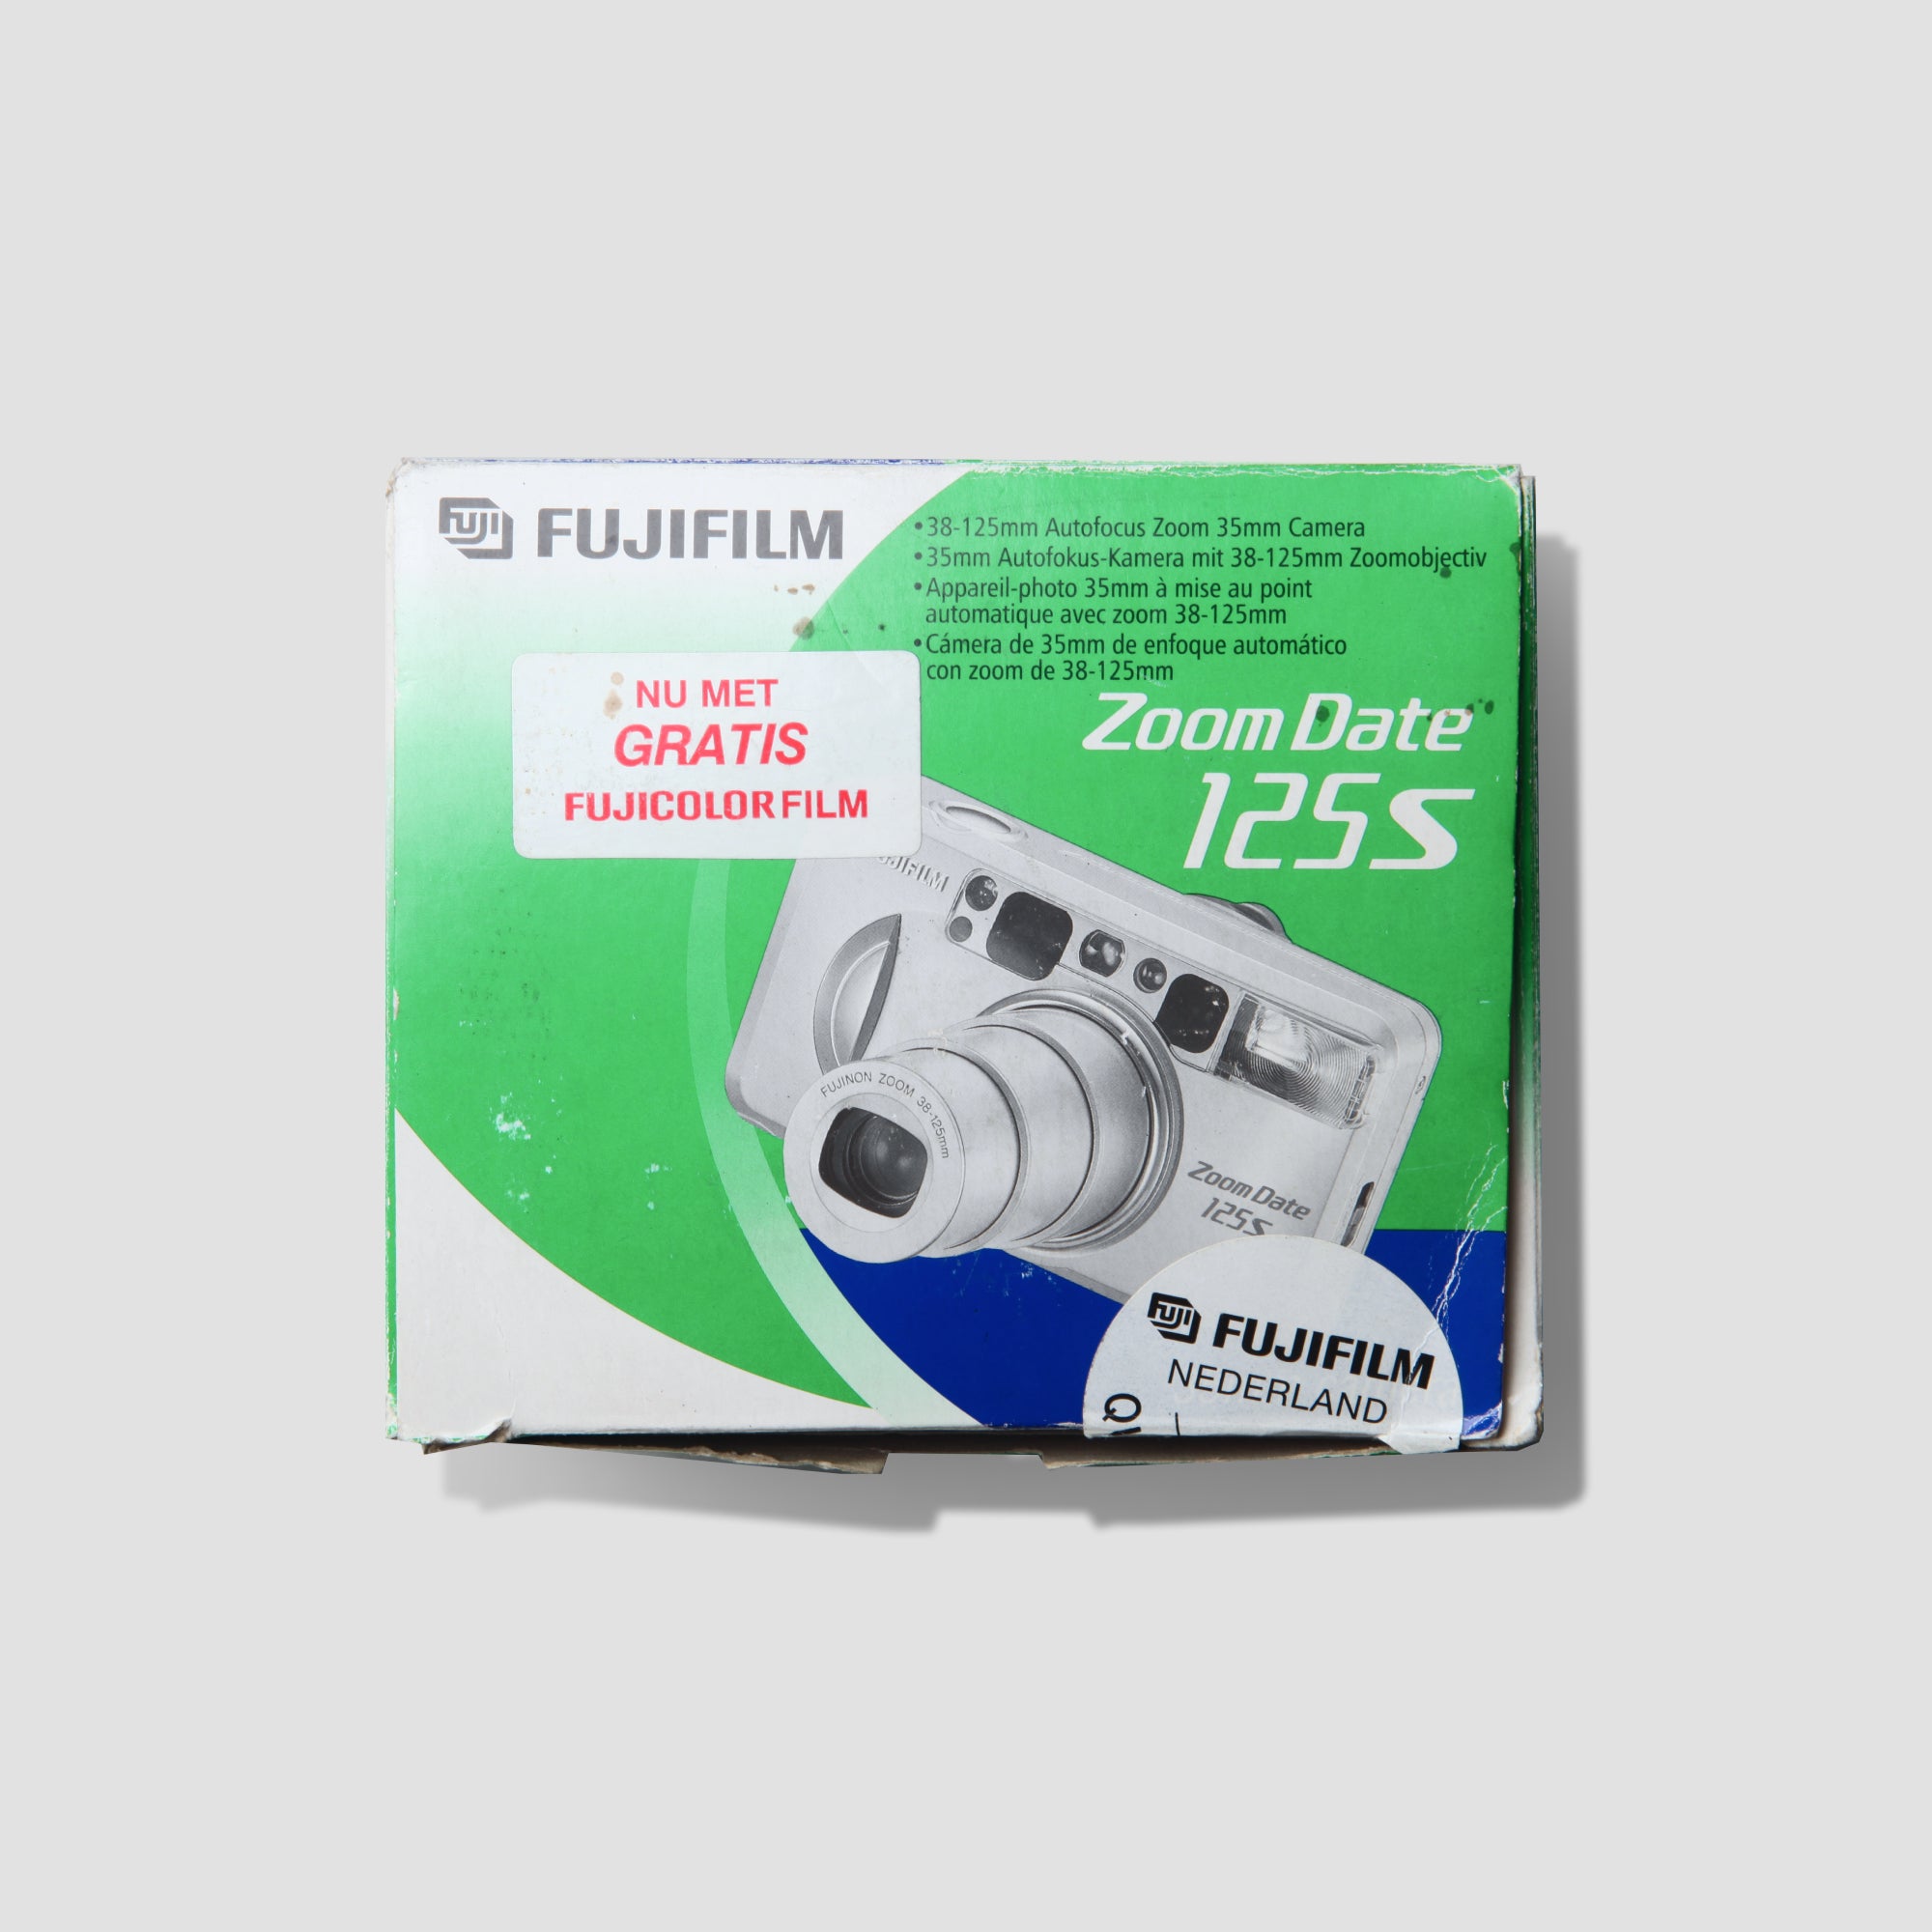 Buy Fujifilm Zoom Date 125S now at Analogue Amsterdam